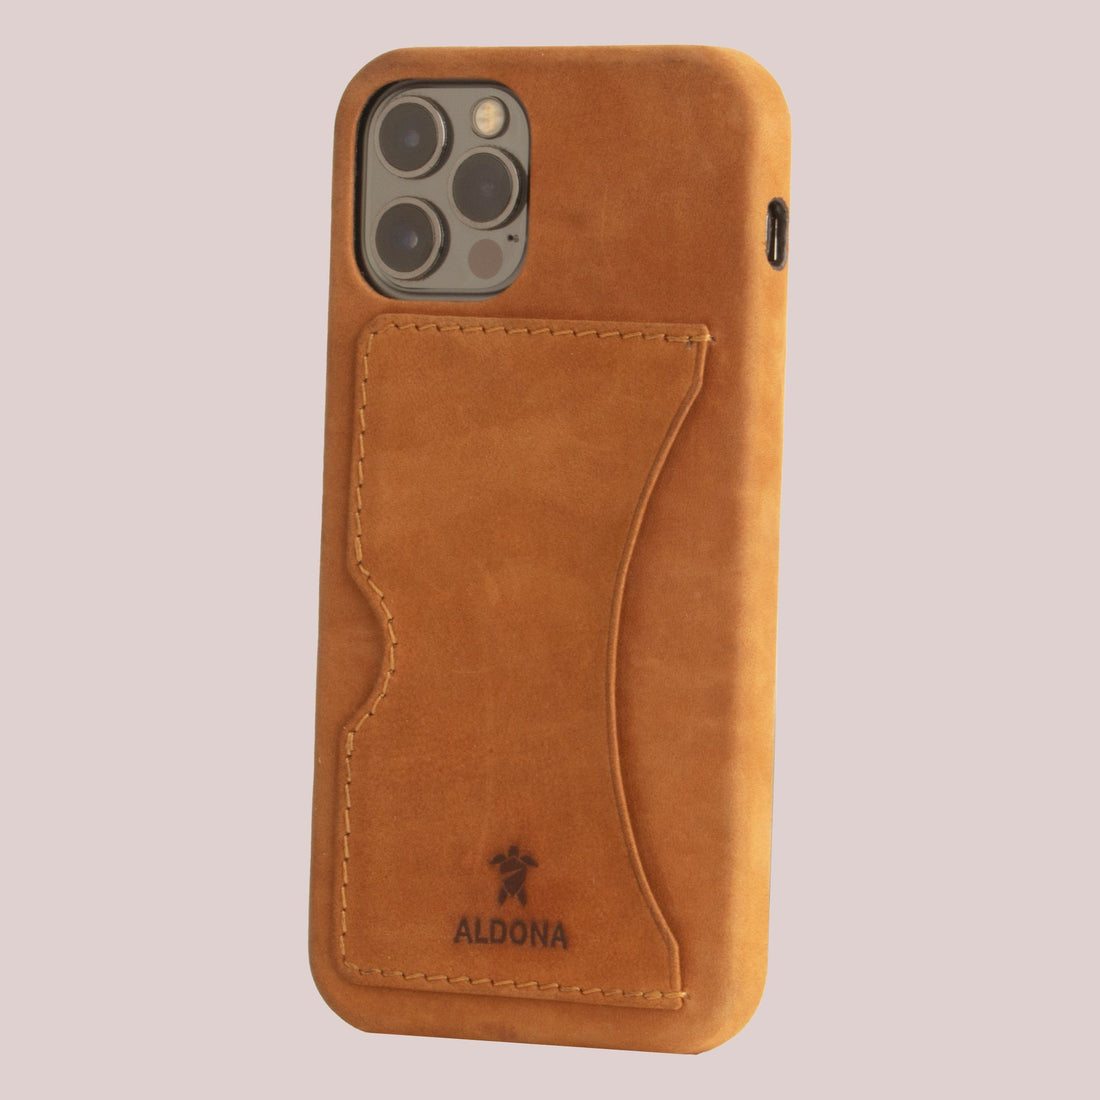 Baxter Card Case for iPhone 13 Mini - Vintage Tan